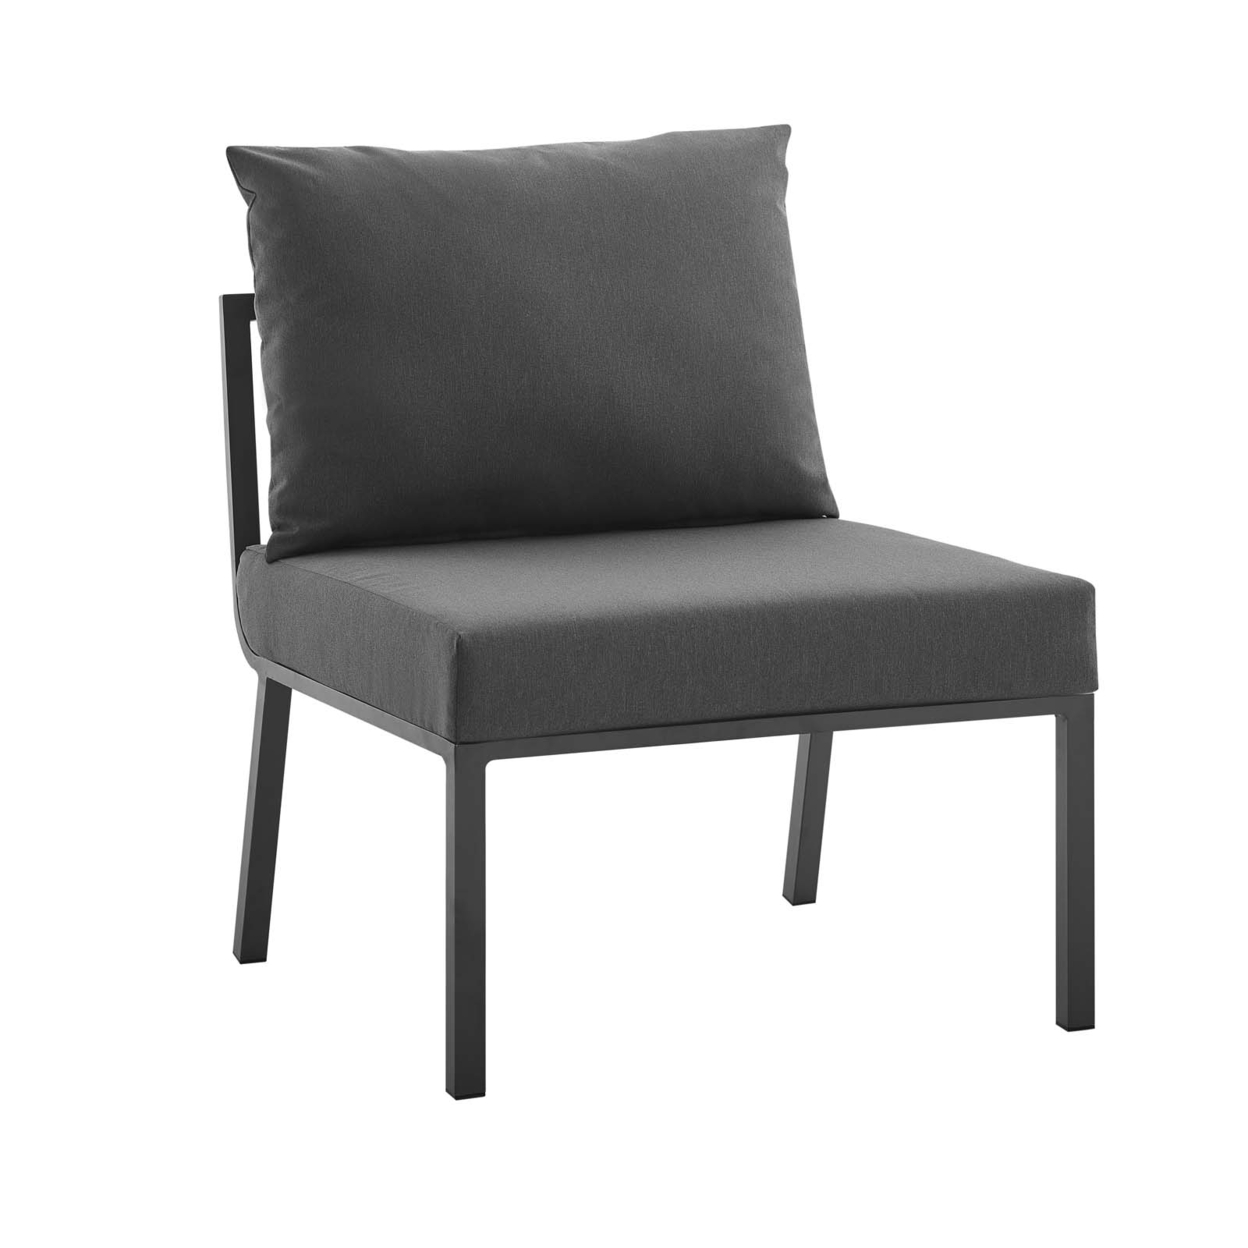 Riverside Outdoor Patio Aluminum Armless Chair,Gray Charcoal